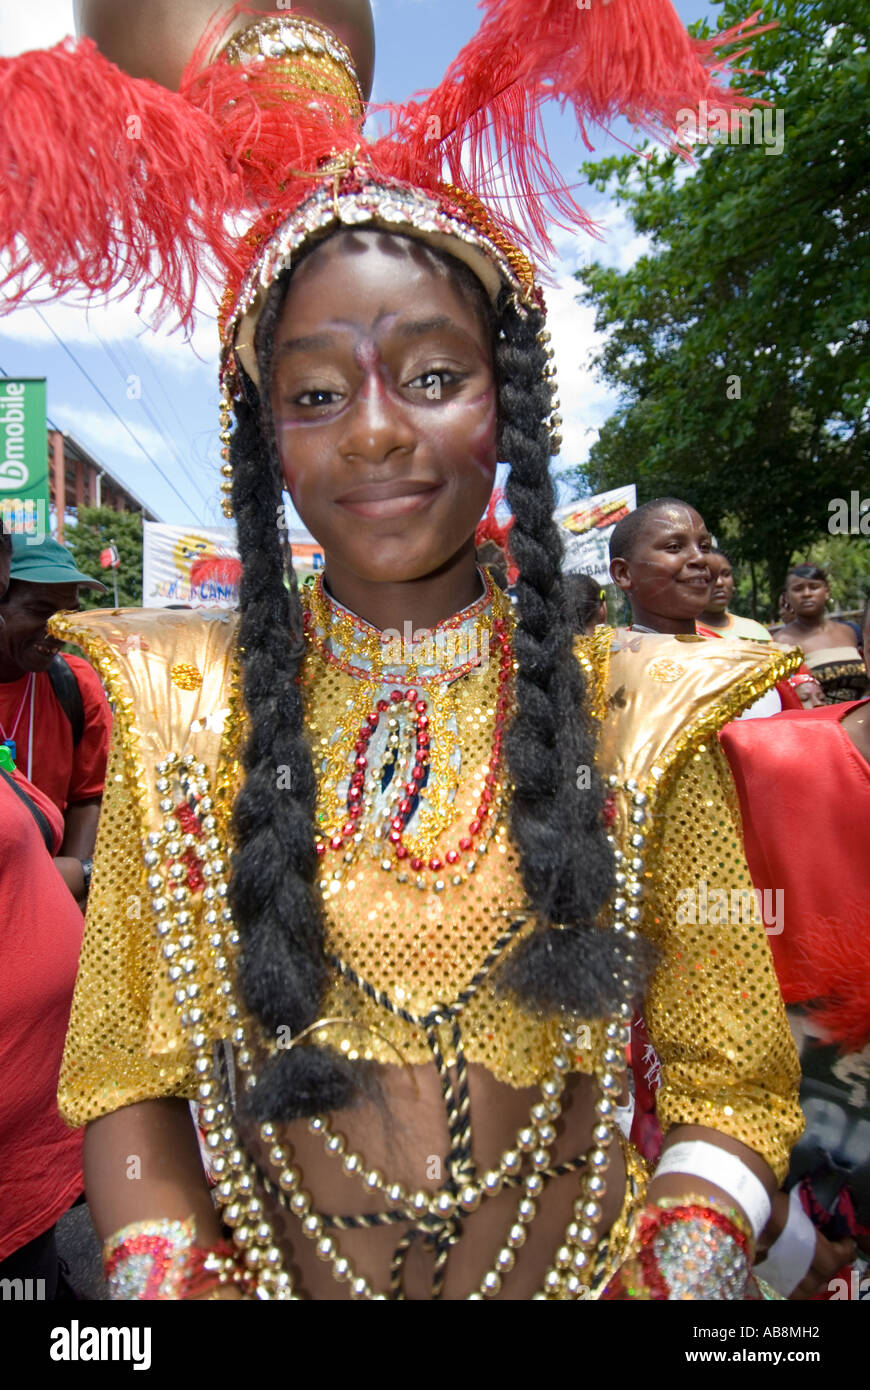 West Indies Port of Spain Trinidad Carnival portrait of Teenage girl in colorful costume at Kids Carnival parade Stock Photo